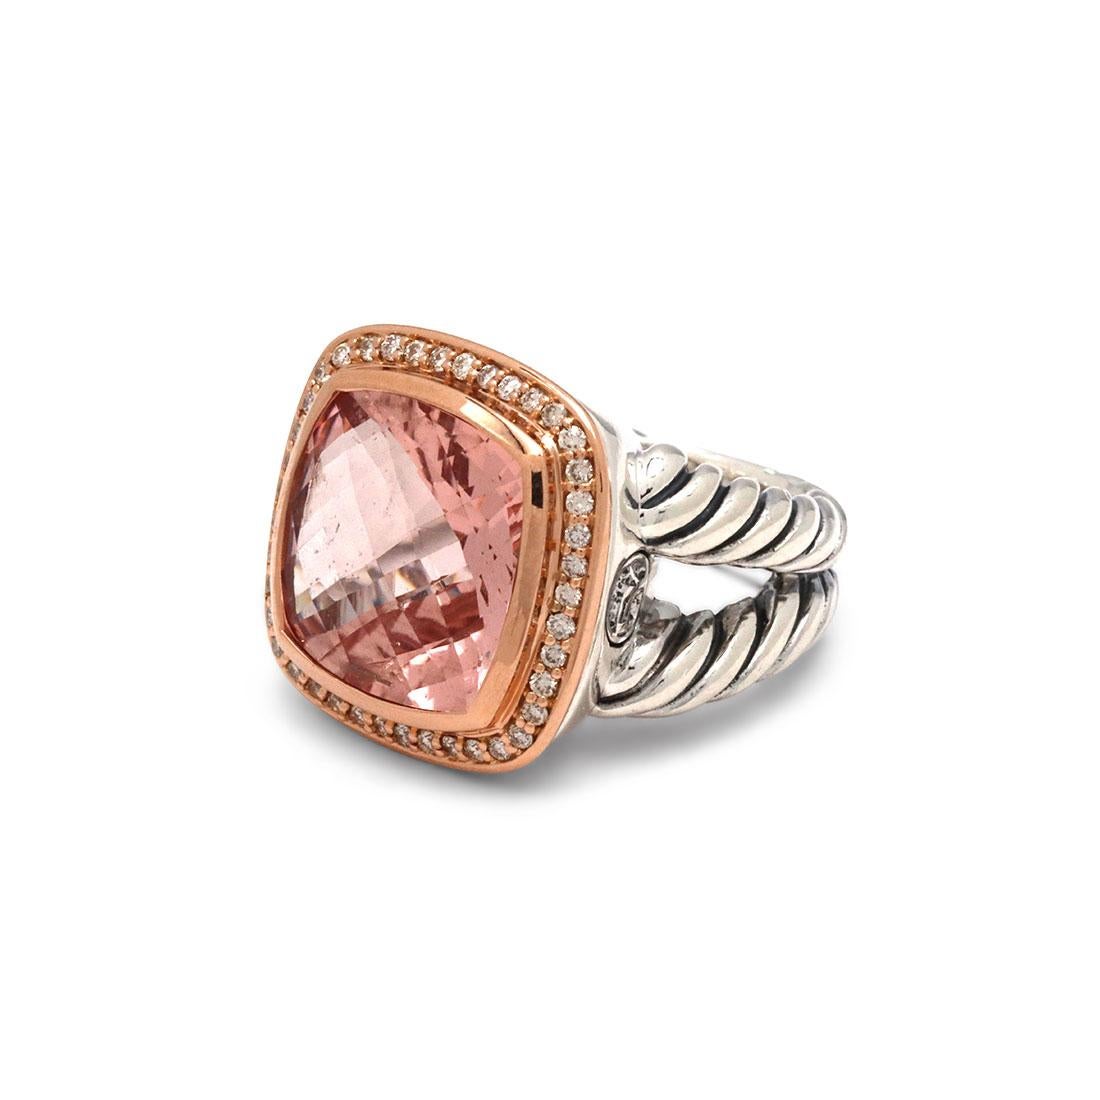 Authentic David Yurman Albion ring crafted in sterling silver and 18 karat rose gold. This ring features a cushion-cut morganite stone. The ring is set with round brilliant cut diamonds with an estimated 0.25 carats total weight. Signed D.Y., 925,